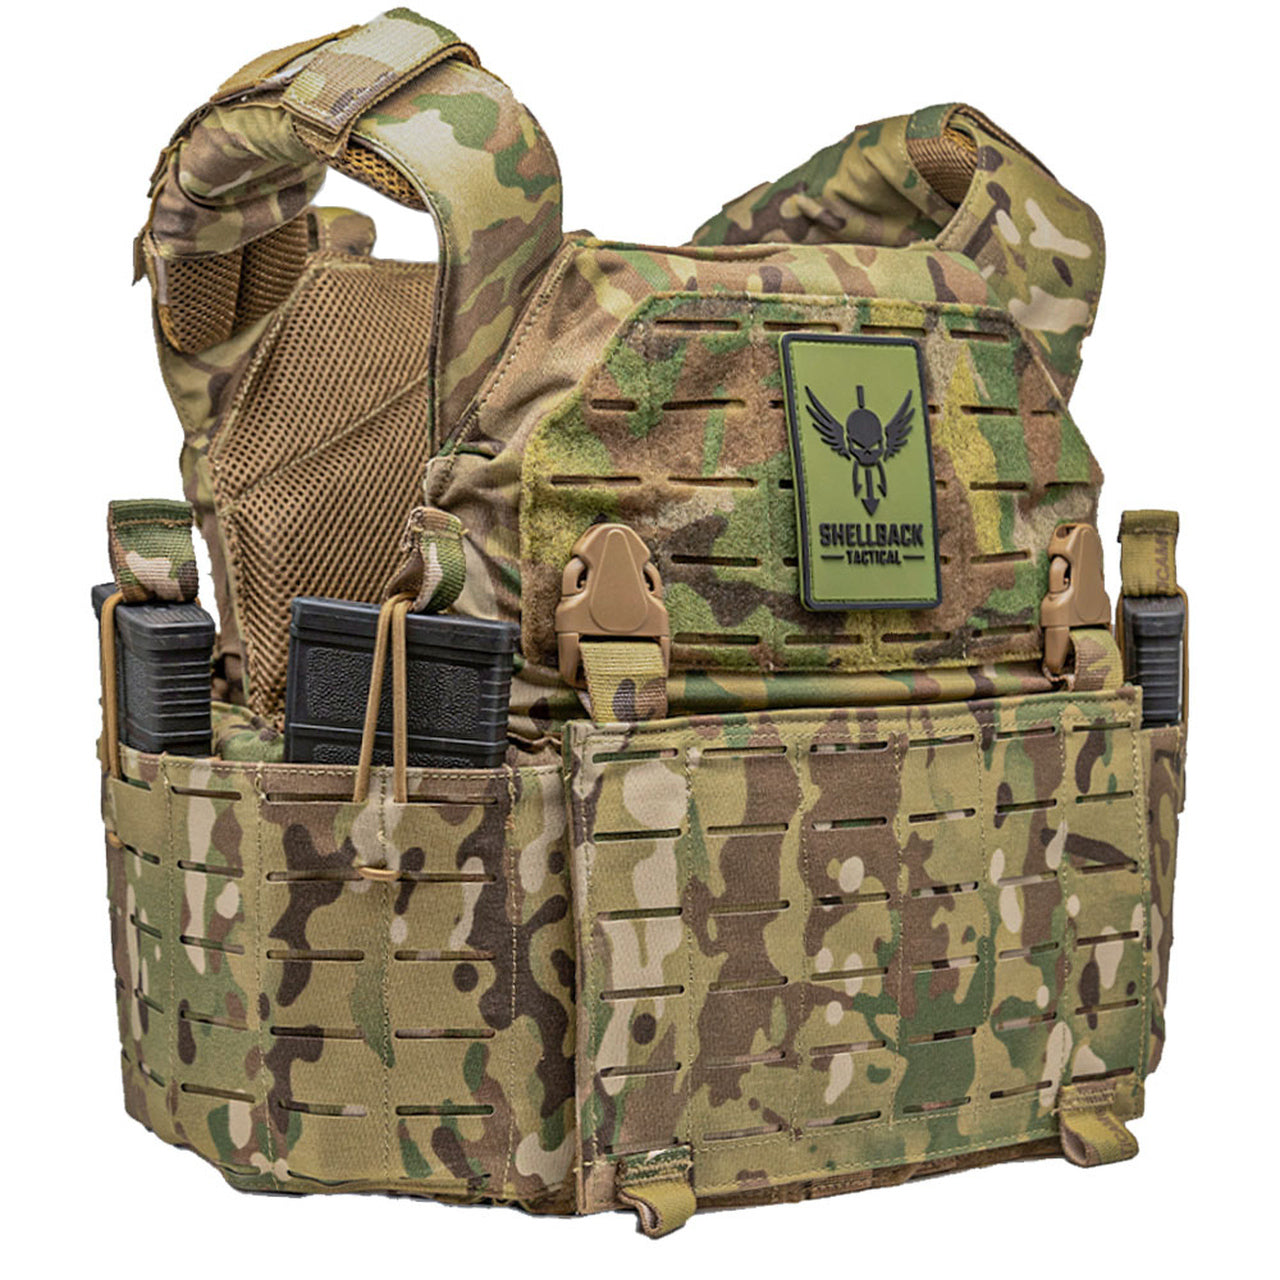 A Shellback Tactical Rampage 2.0 Plate Carrier with multiple compartments.